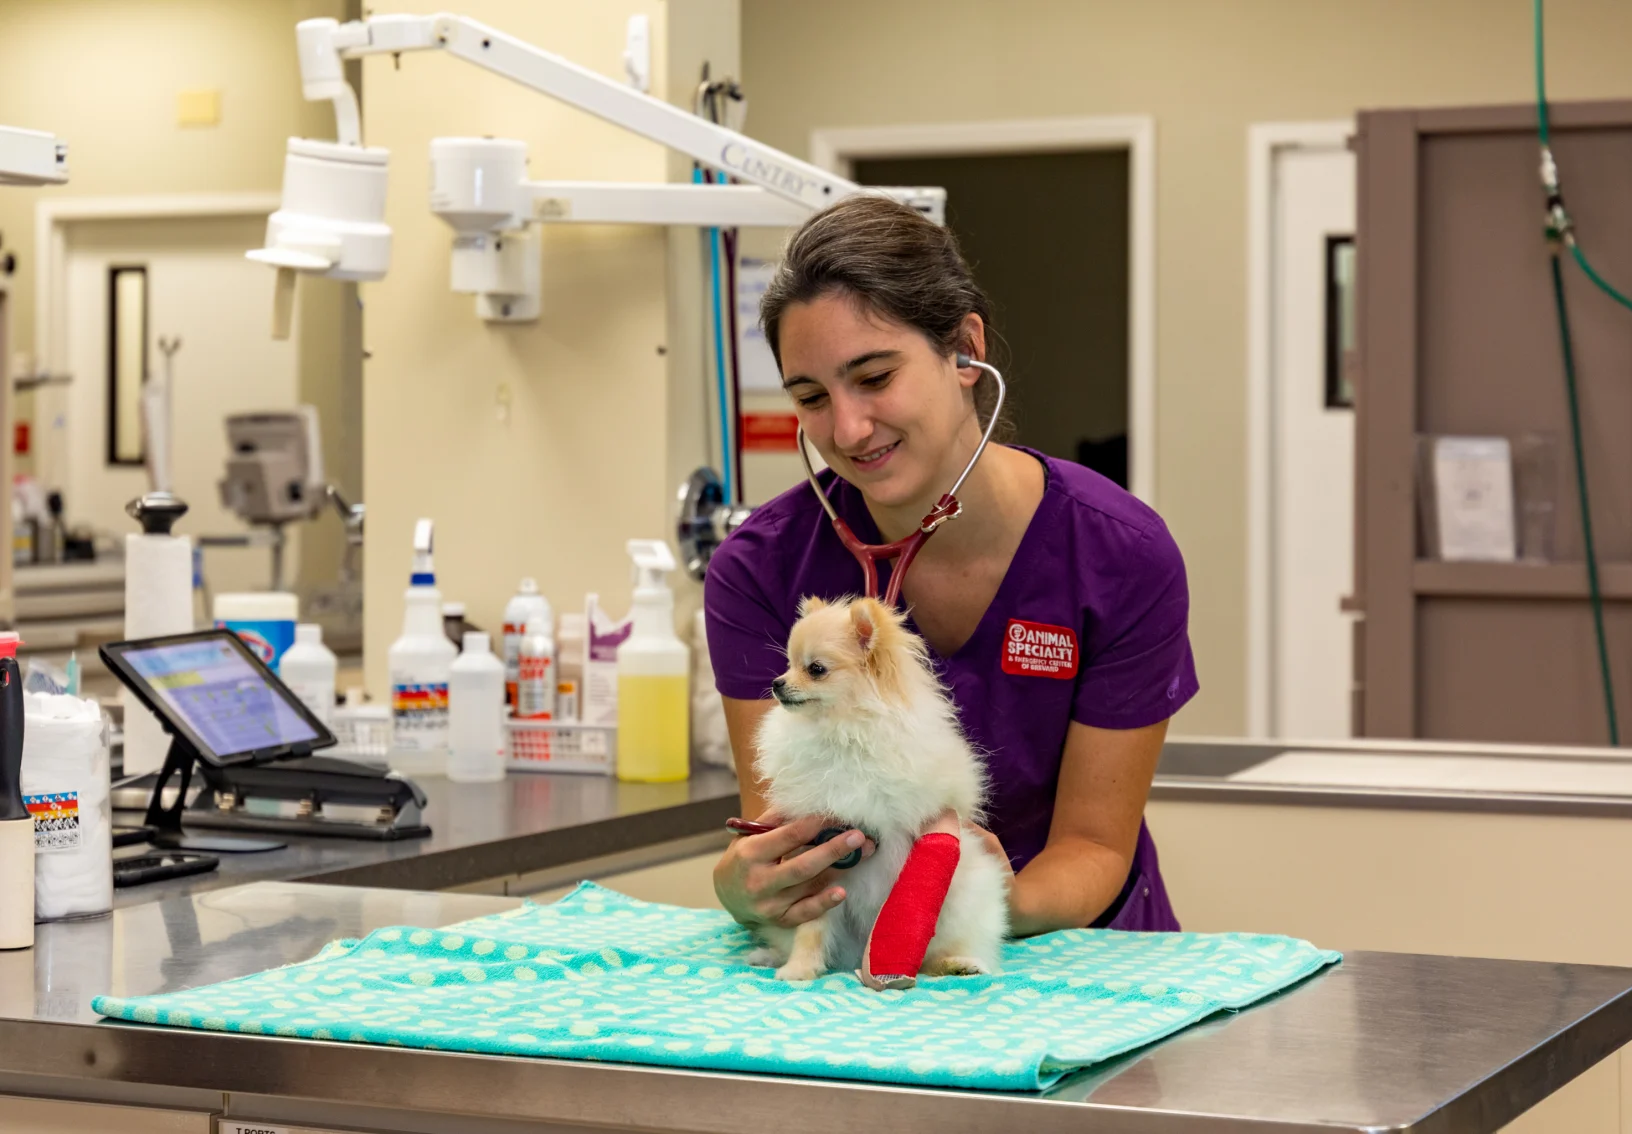 Staff with Dog with Cast on Paw at Animal Specialty & Emergency Center of Brevard